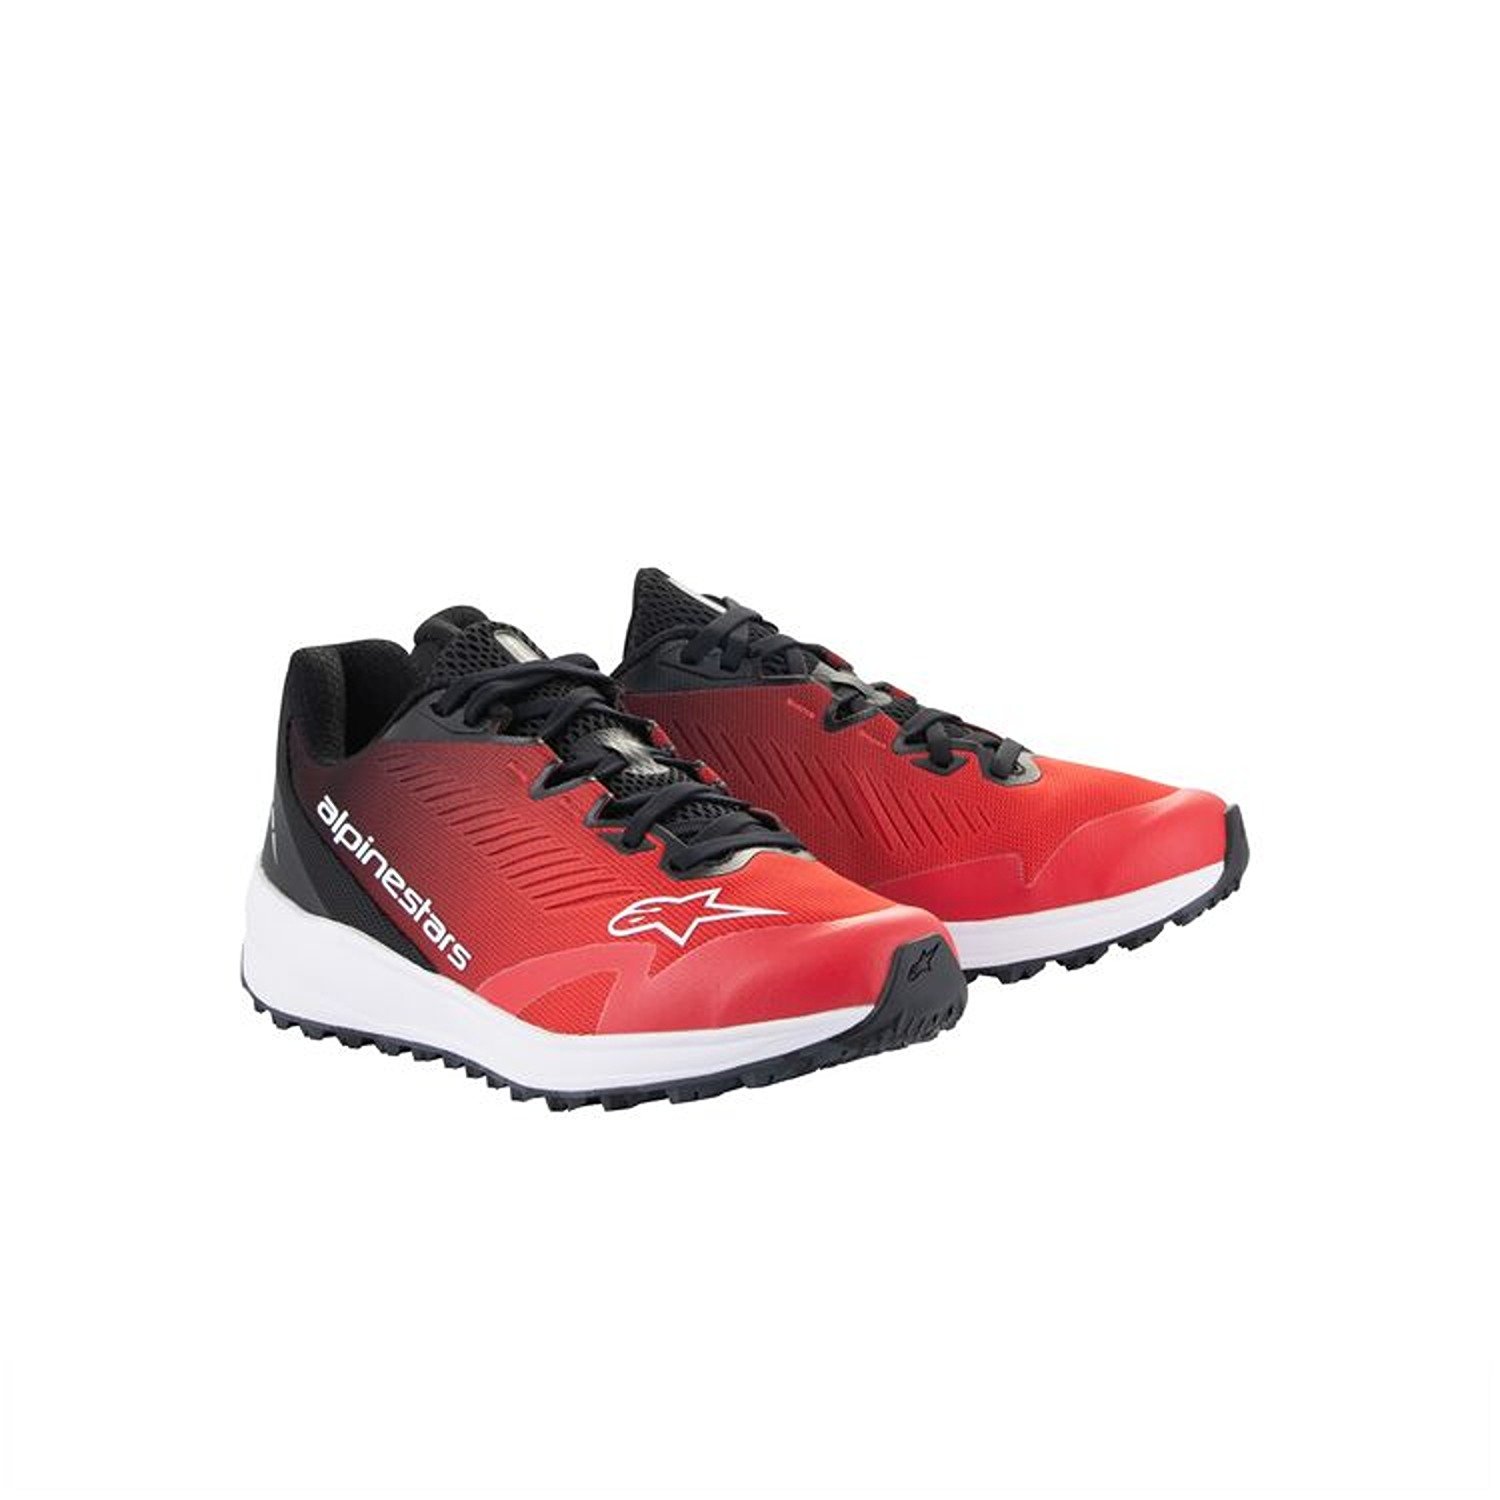 Image of Alpinestars Meta Road V2 Shoes Red Black White Taille US 7